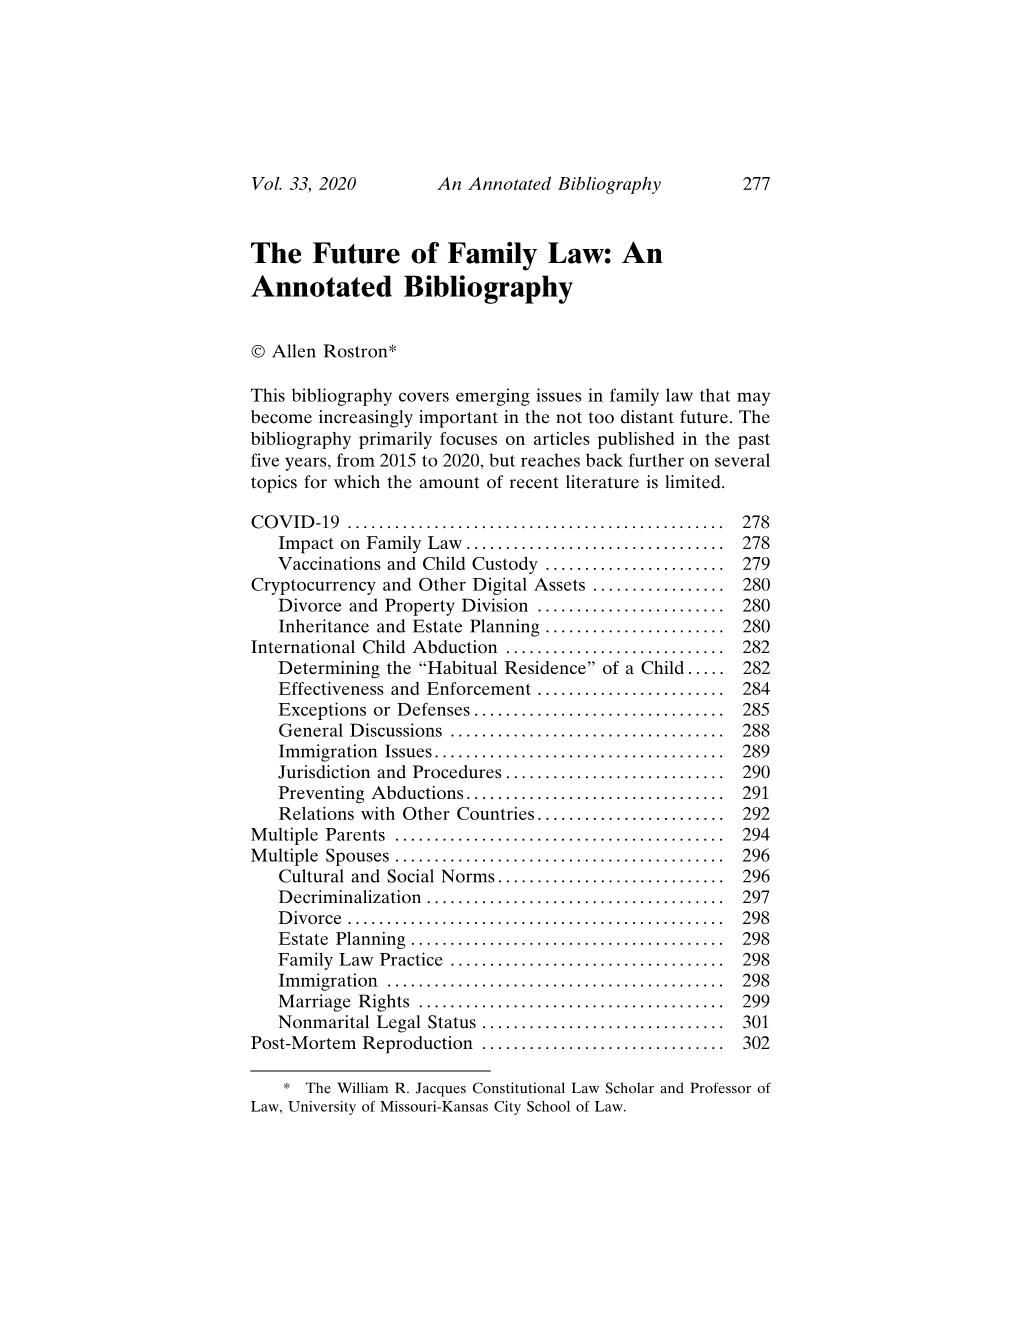 The Future of Family Law: an Annotated Bibliography